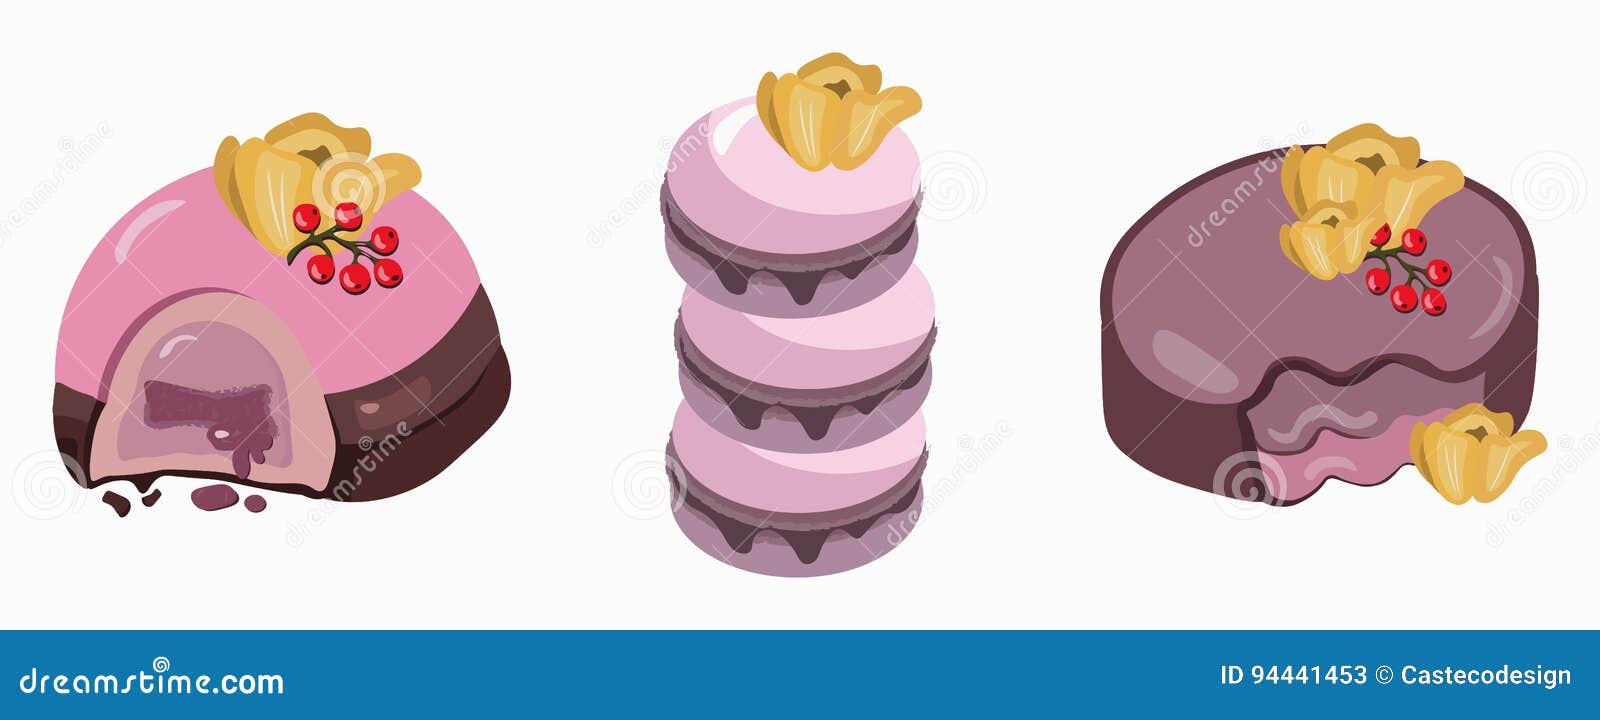 Berry Mousse Macarons And Delicious Cake Sweet Dessert Lavender Flavors Vector Illustration Stock Vector Illustration Of Bakery Carnival 94441453